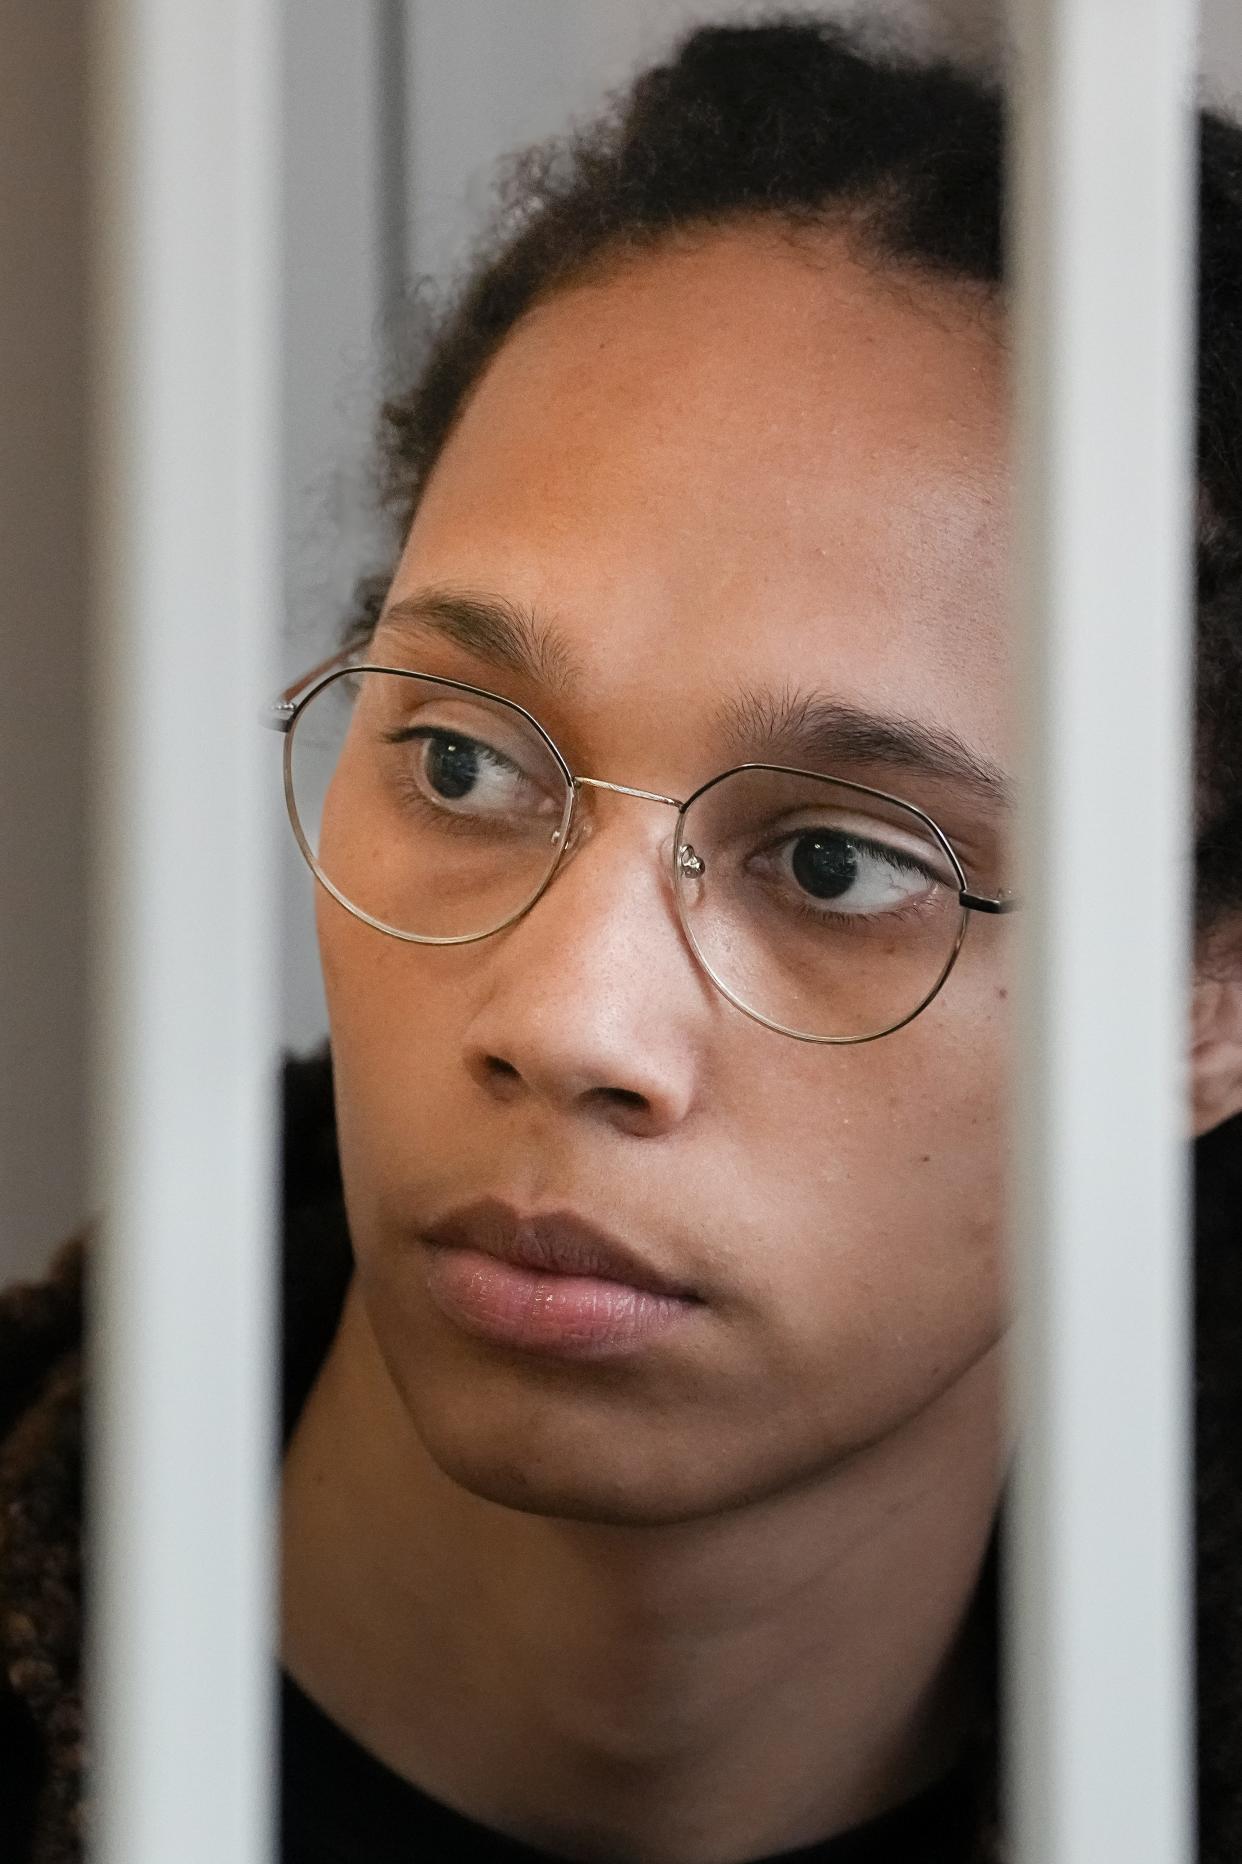 WNBA star and two-time Olympic gold medalist Brittney Griner looks through bars sitting in a cage in a courtroom prior to a hearing, in Khimki just outside Moscow, Russia, Wednesday, July 27, 2022.